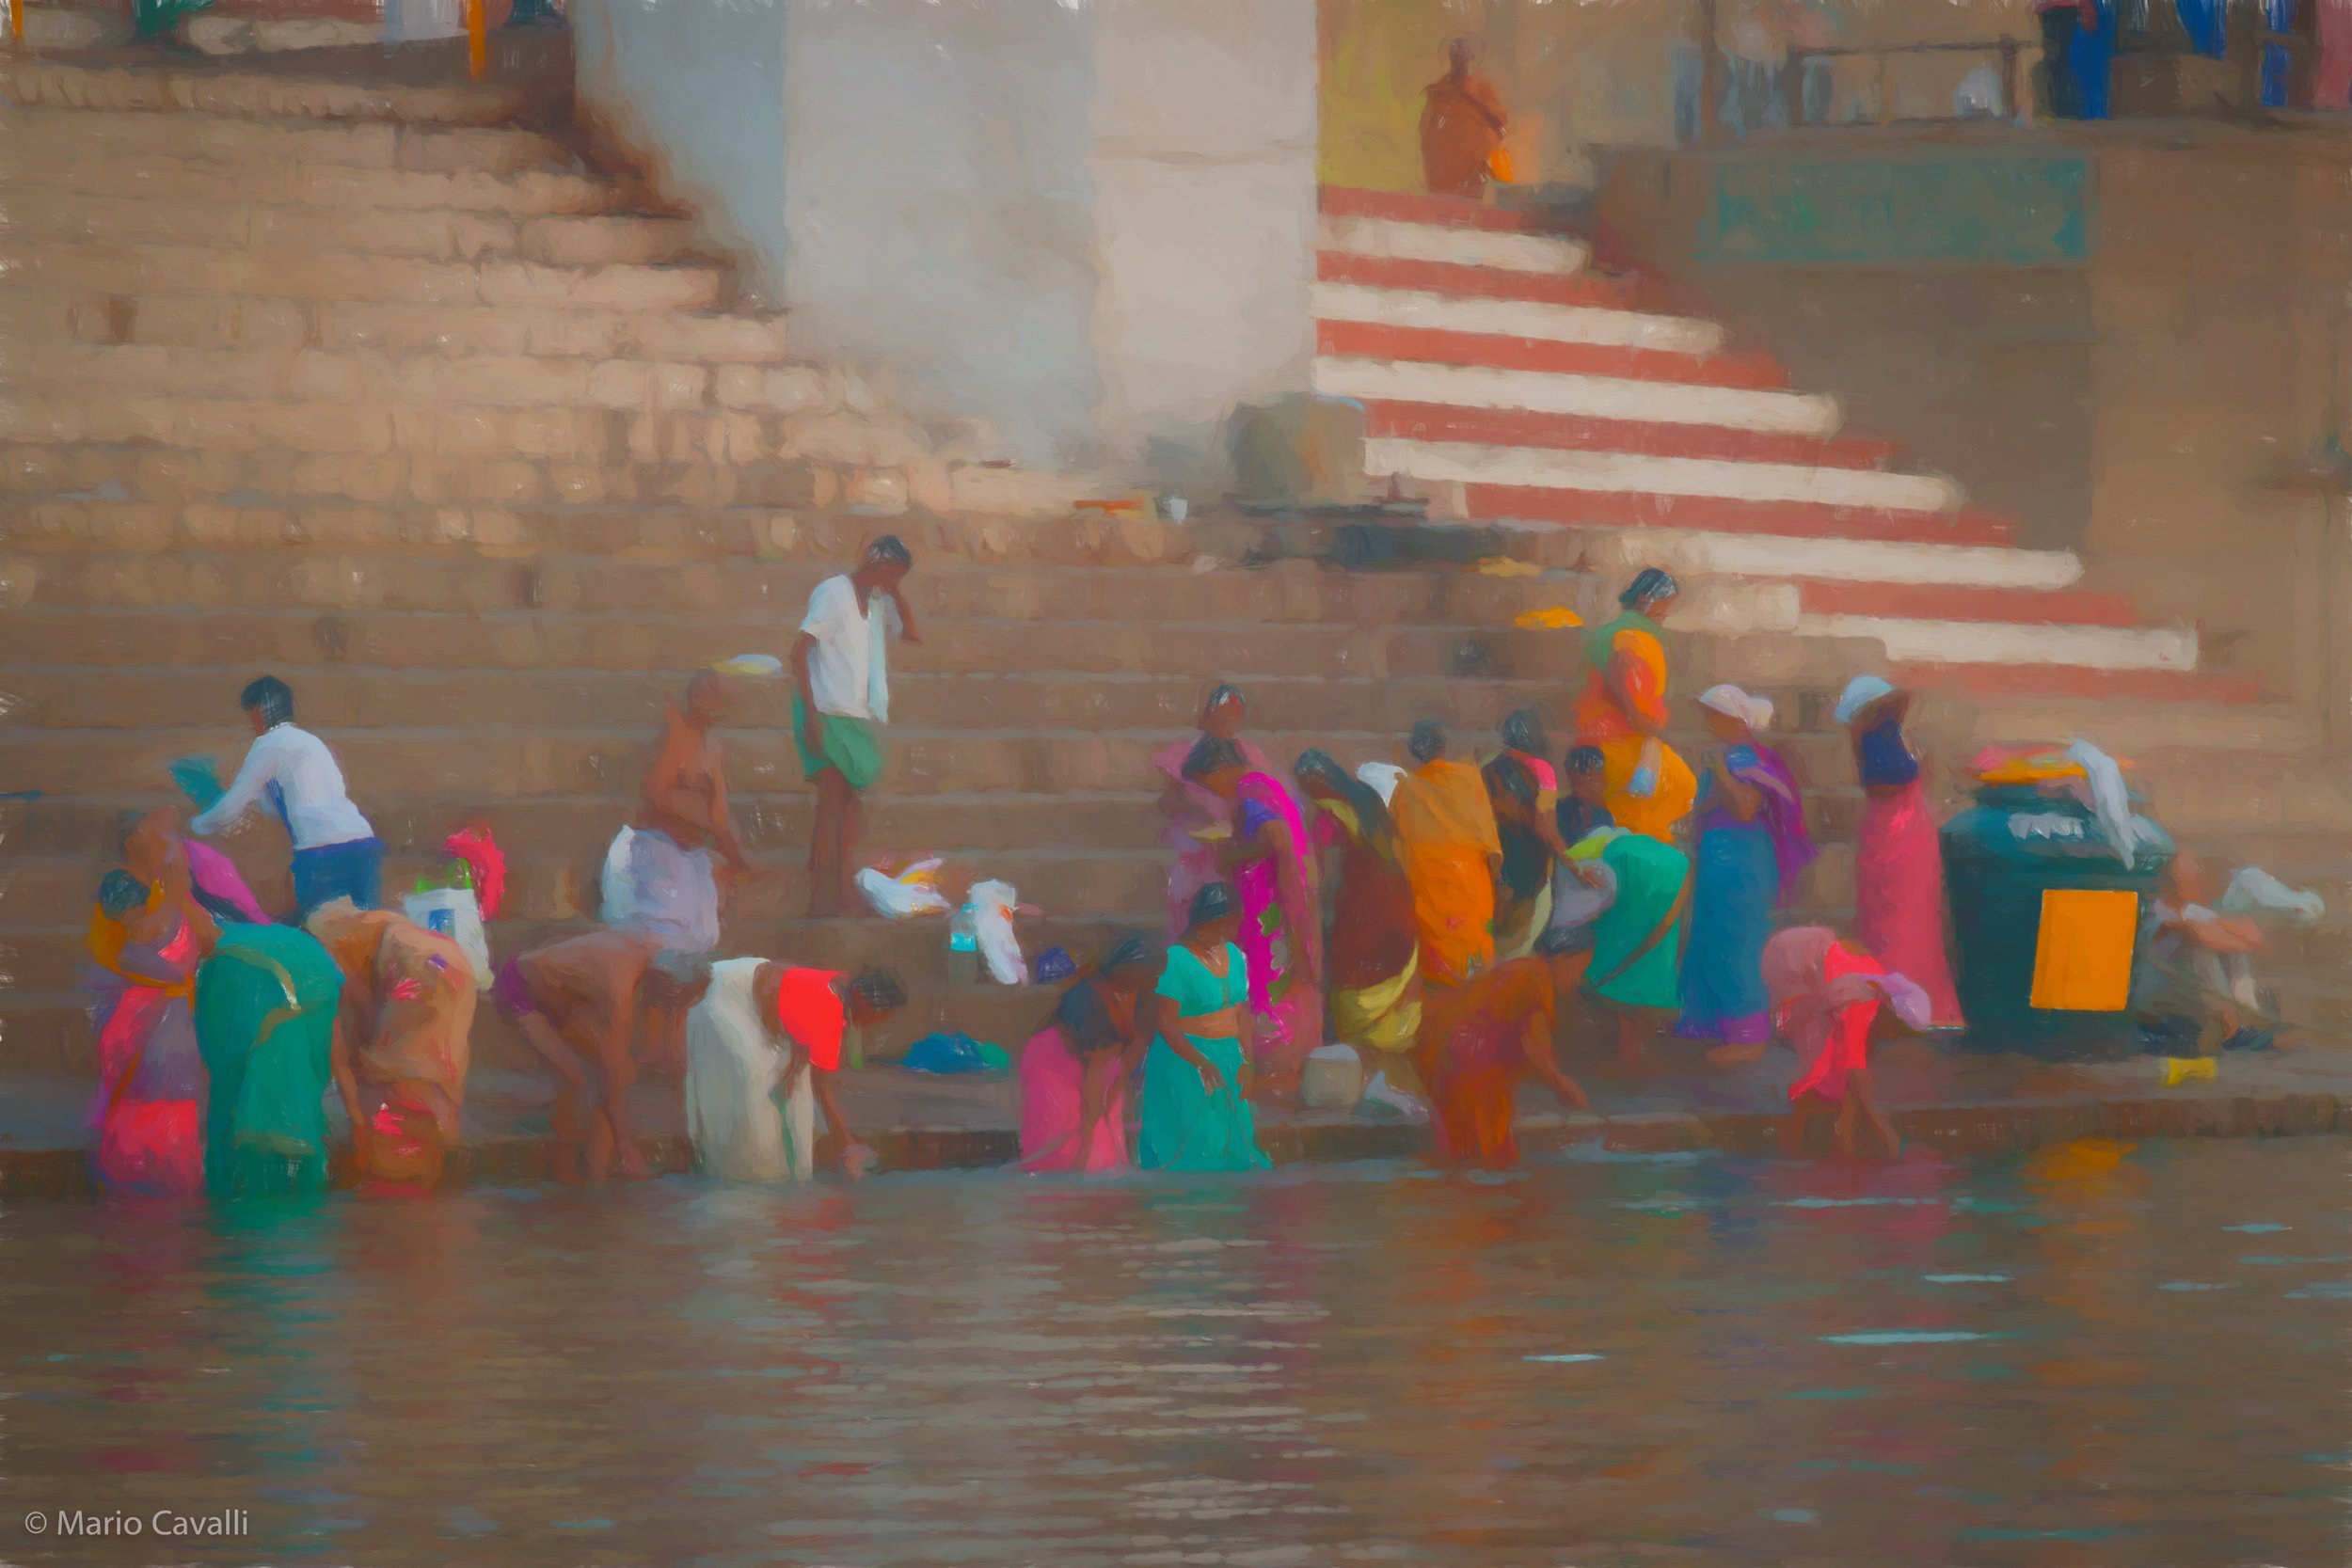 Washing on the Ghat